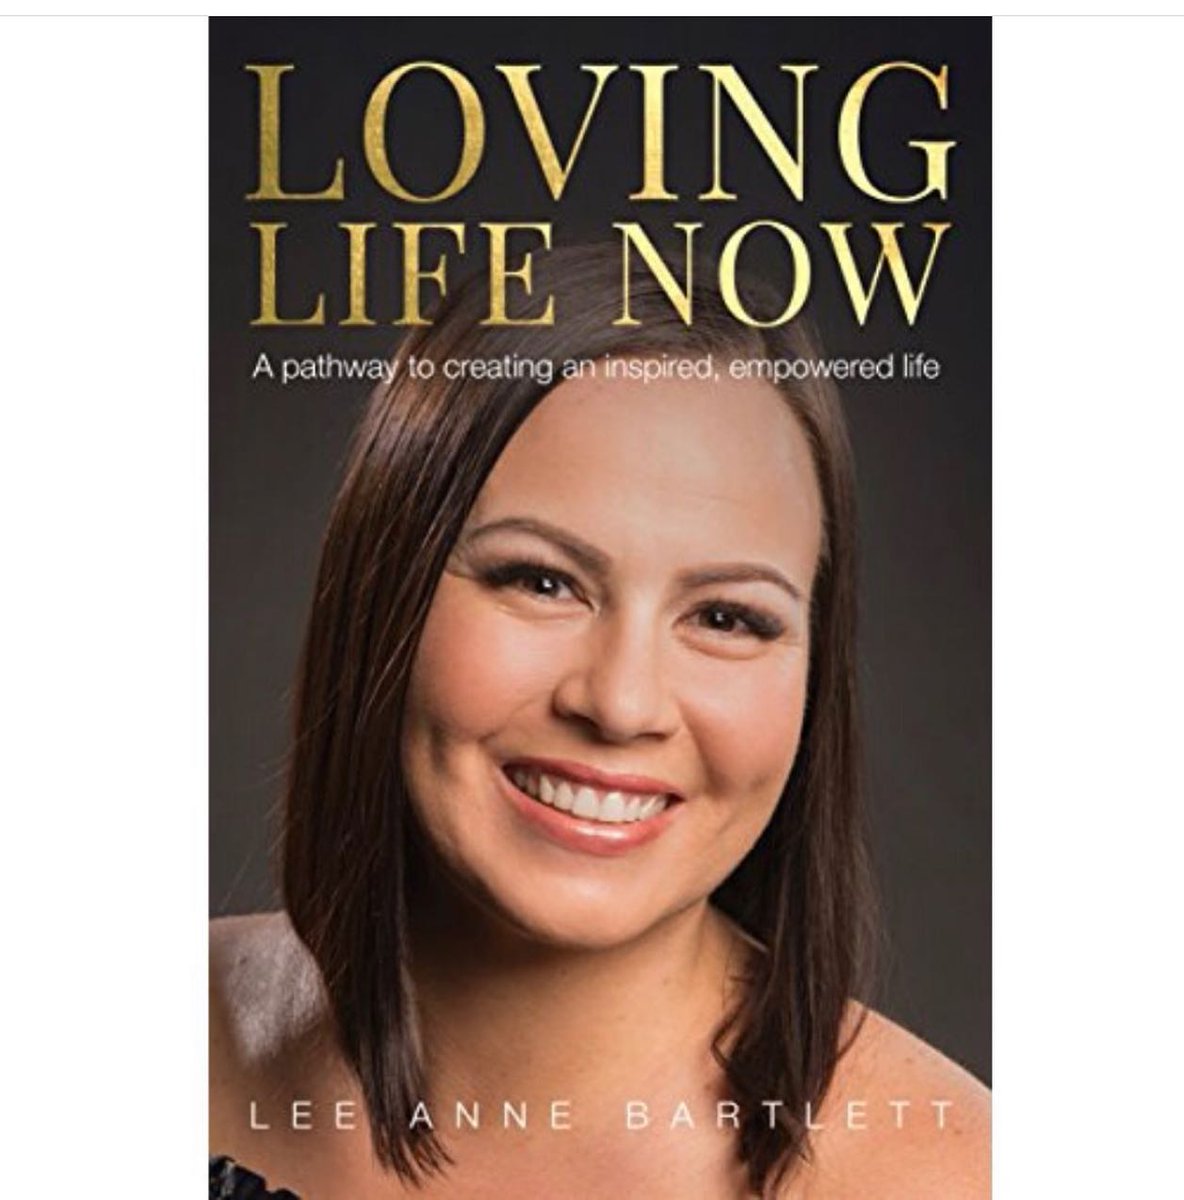 Life can really can be FUN and you can be Loving your Life now!

Loving Life Now: A pathway to creating an inspired, empowered life. BUY your copy from Amazon now

amazon.com.au/Loving-Life-No…​

#lovinglifenow #workfromhome #lifestyleloveandbeyond #inspiration #success #lifegoals